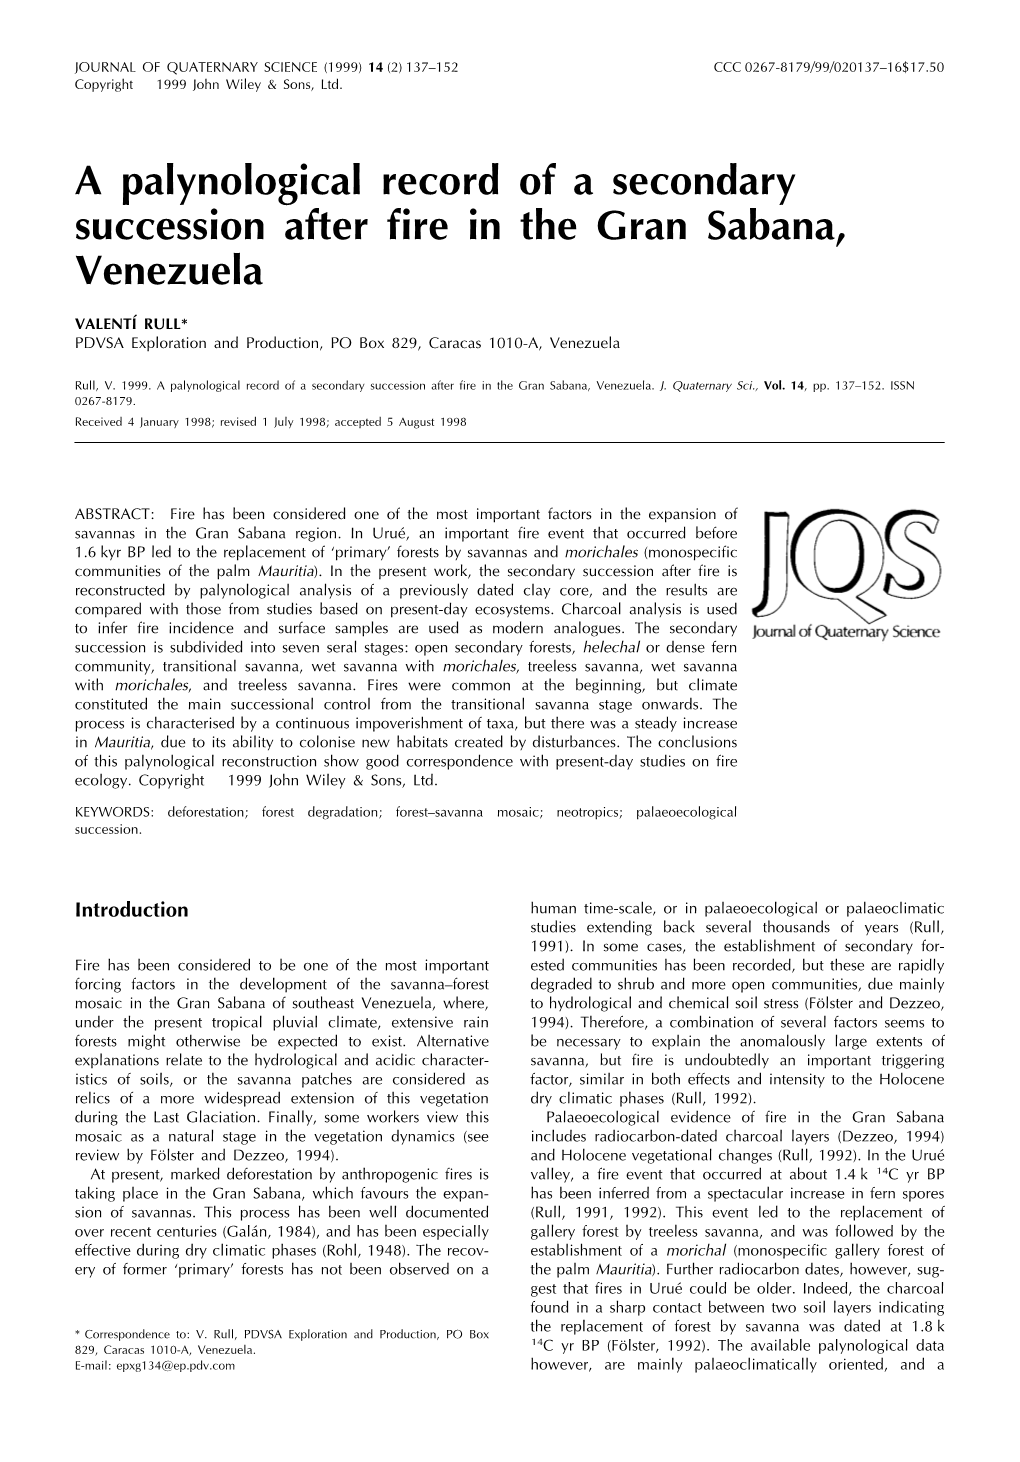 A Palynological Record of a Secondary Succession After Fire in the Gran Sabana, Venezuela